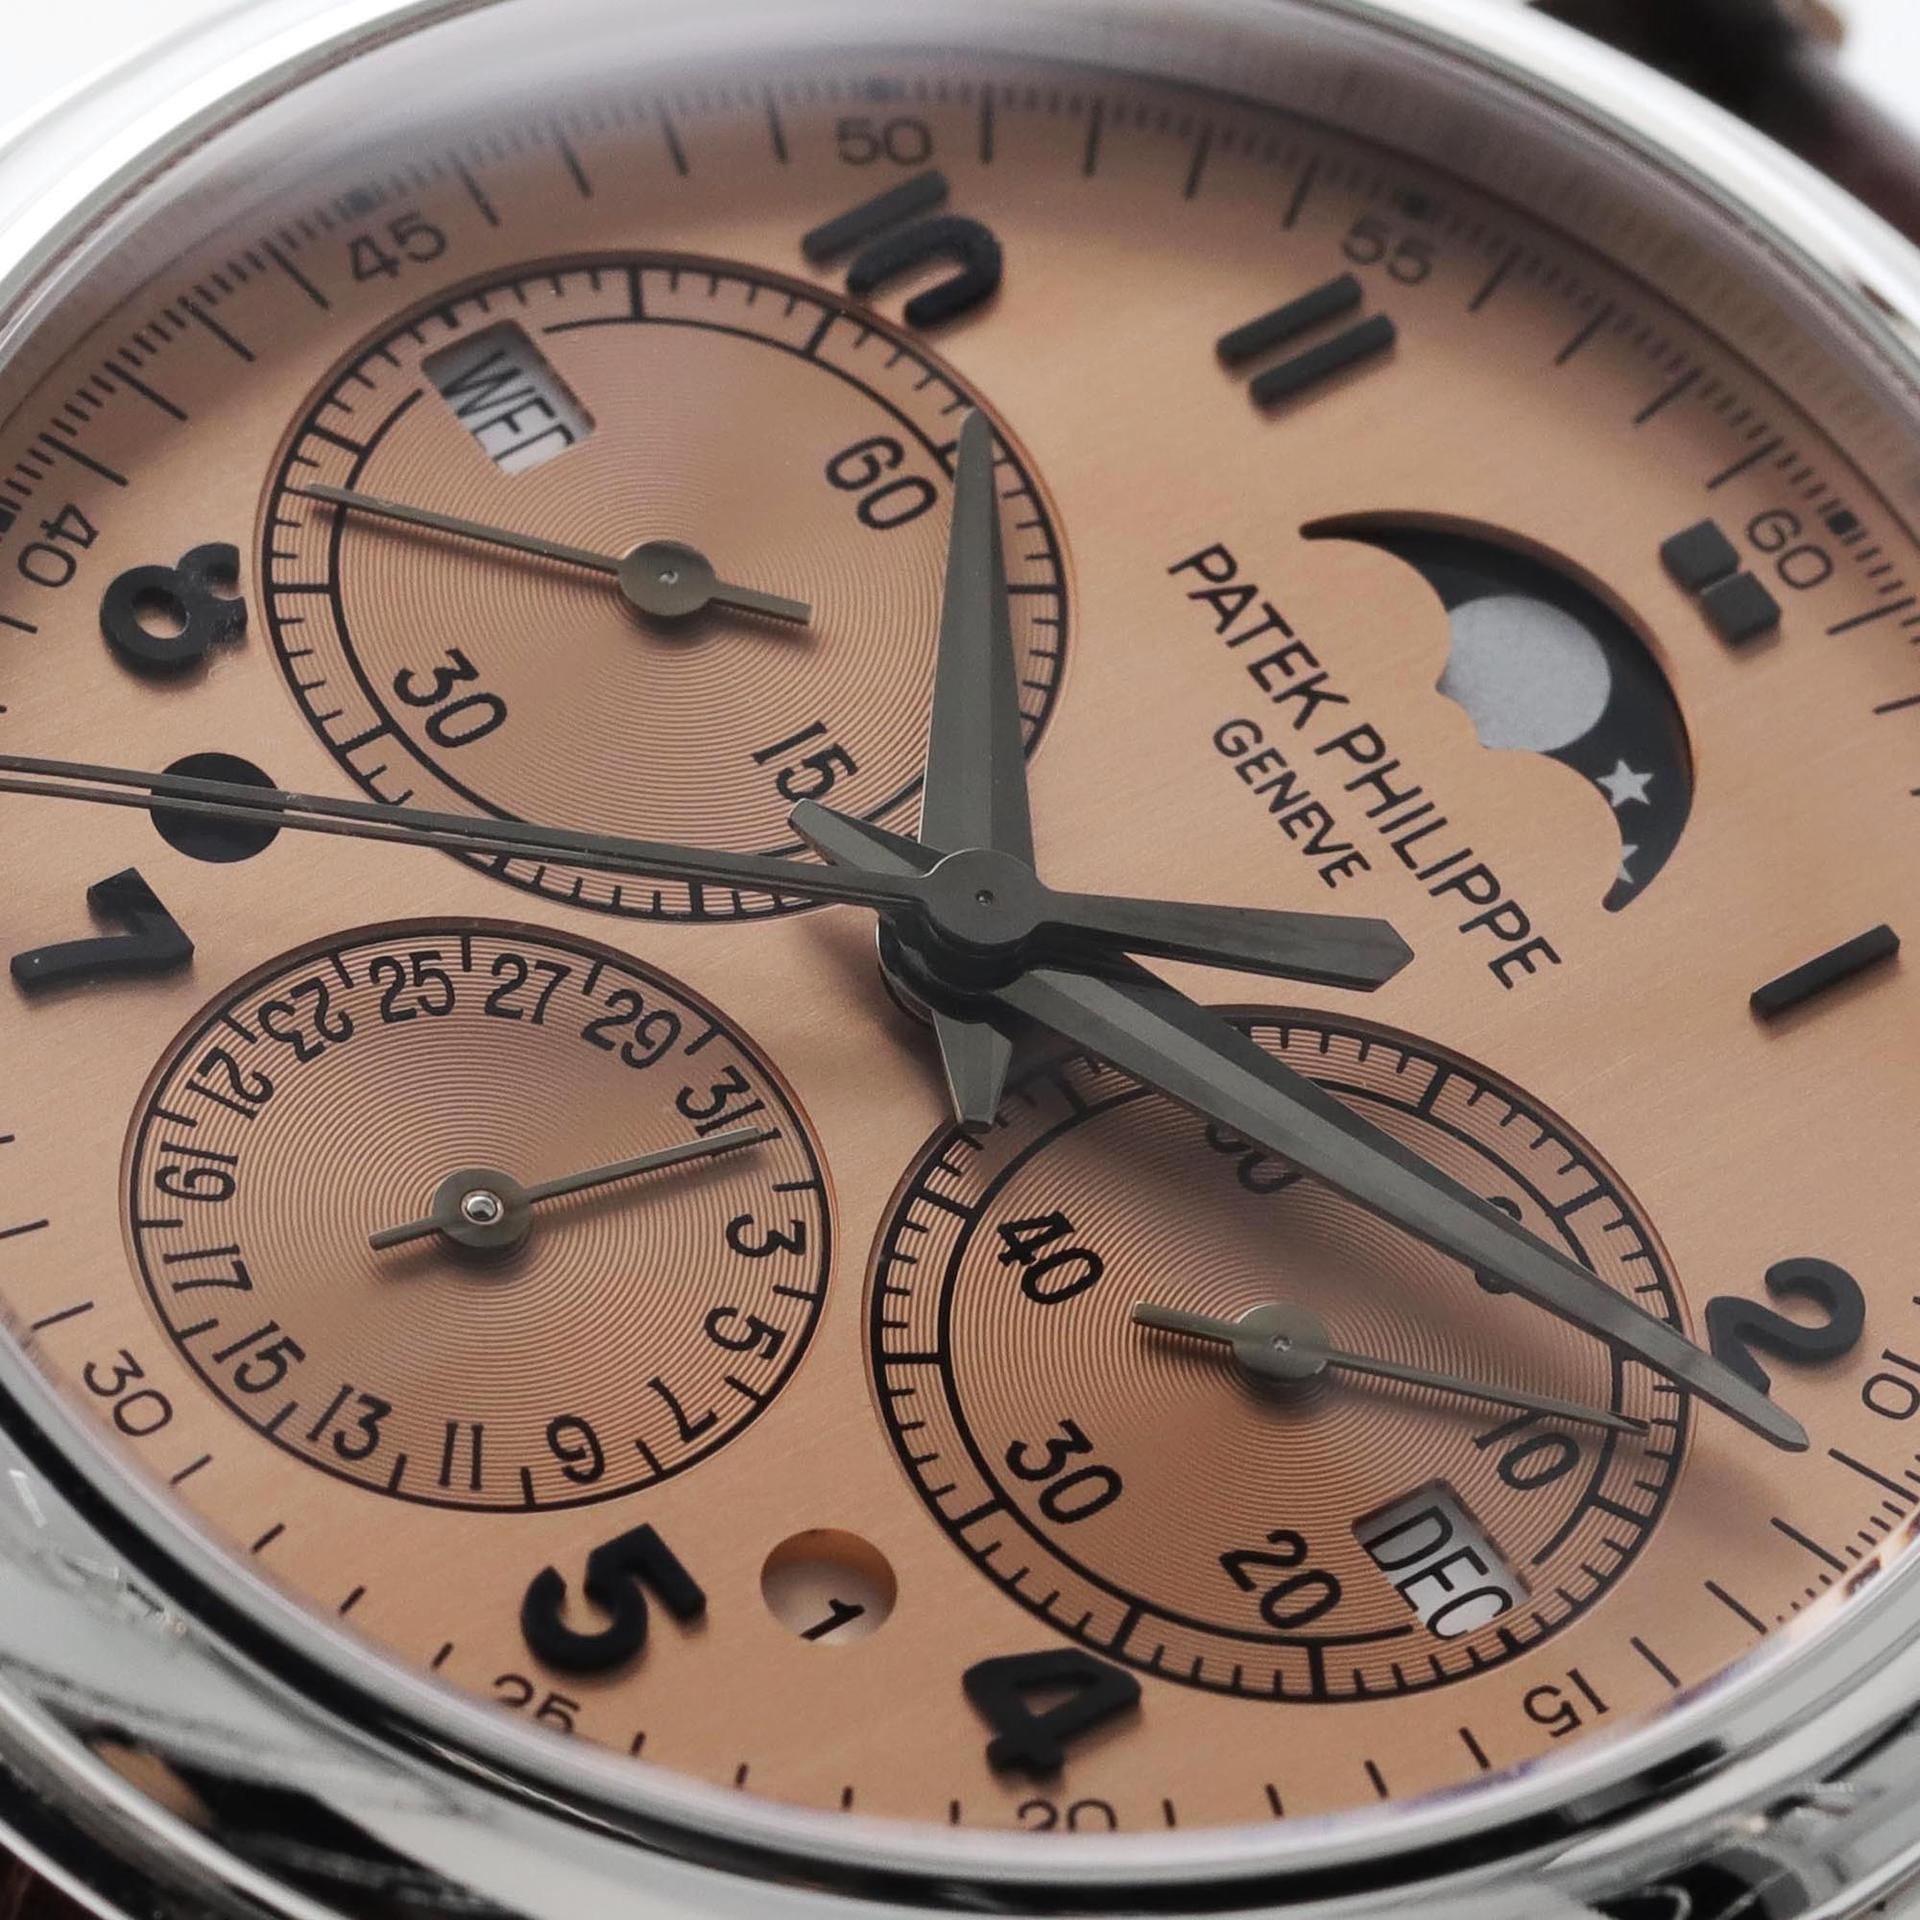 Perpetual Calendar Split-Second Monopusher Chronograph with Salmon dial condition photo